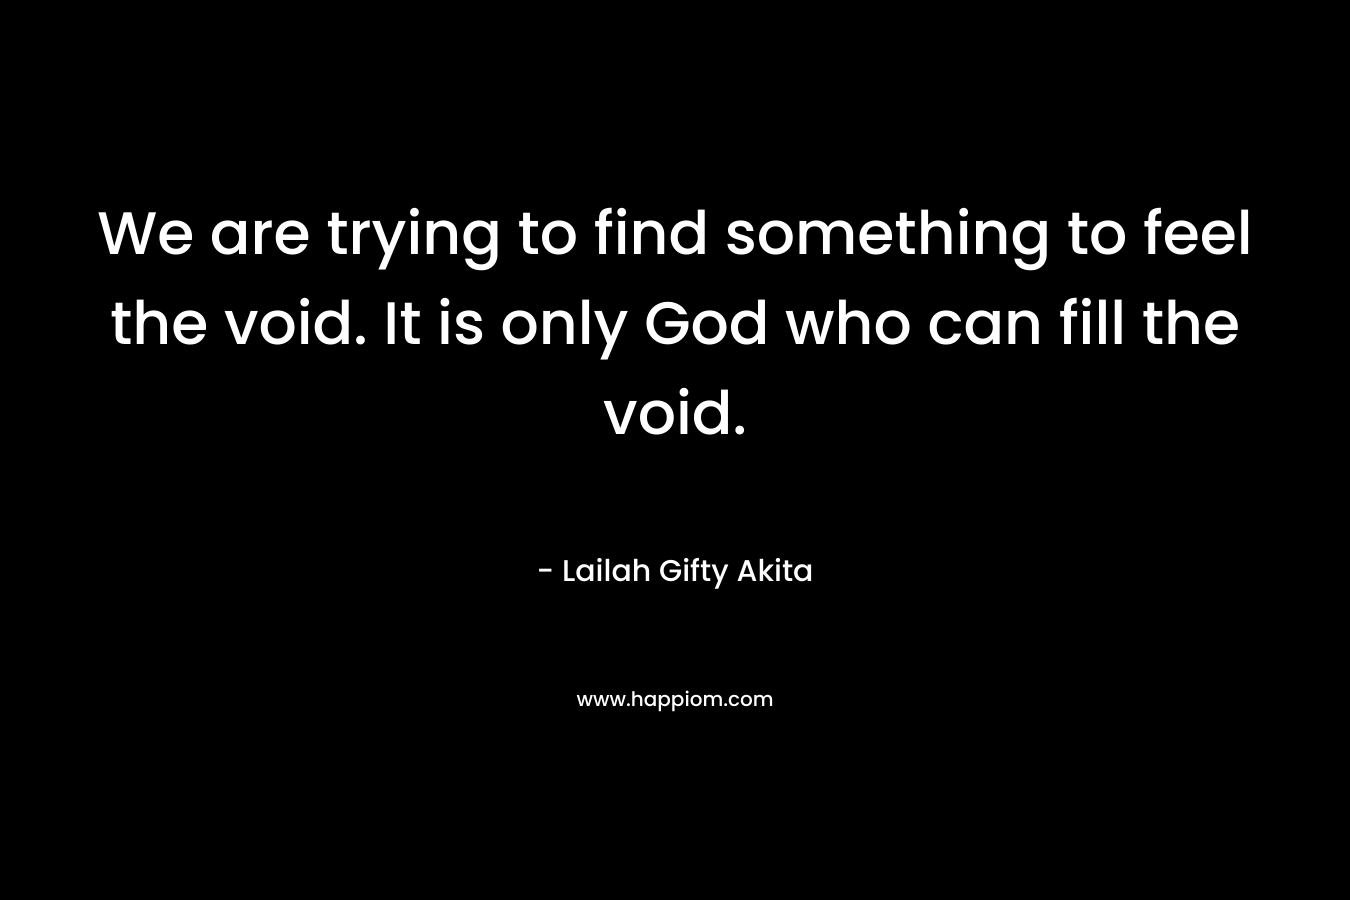 We are trying to find something to feel the void. It is only God who can fill the void.